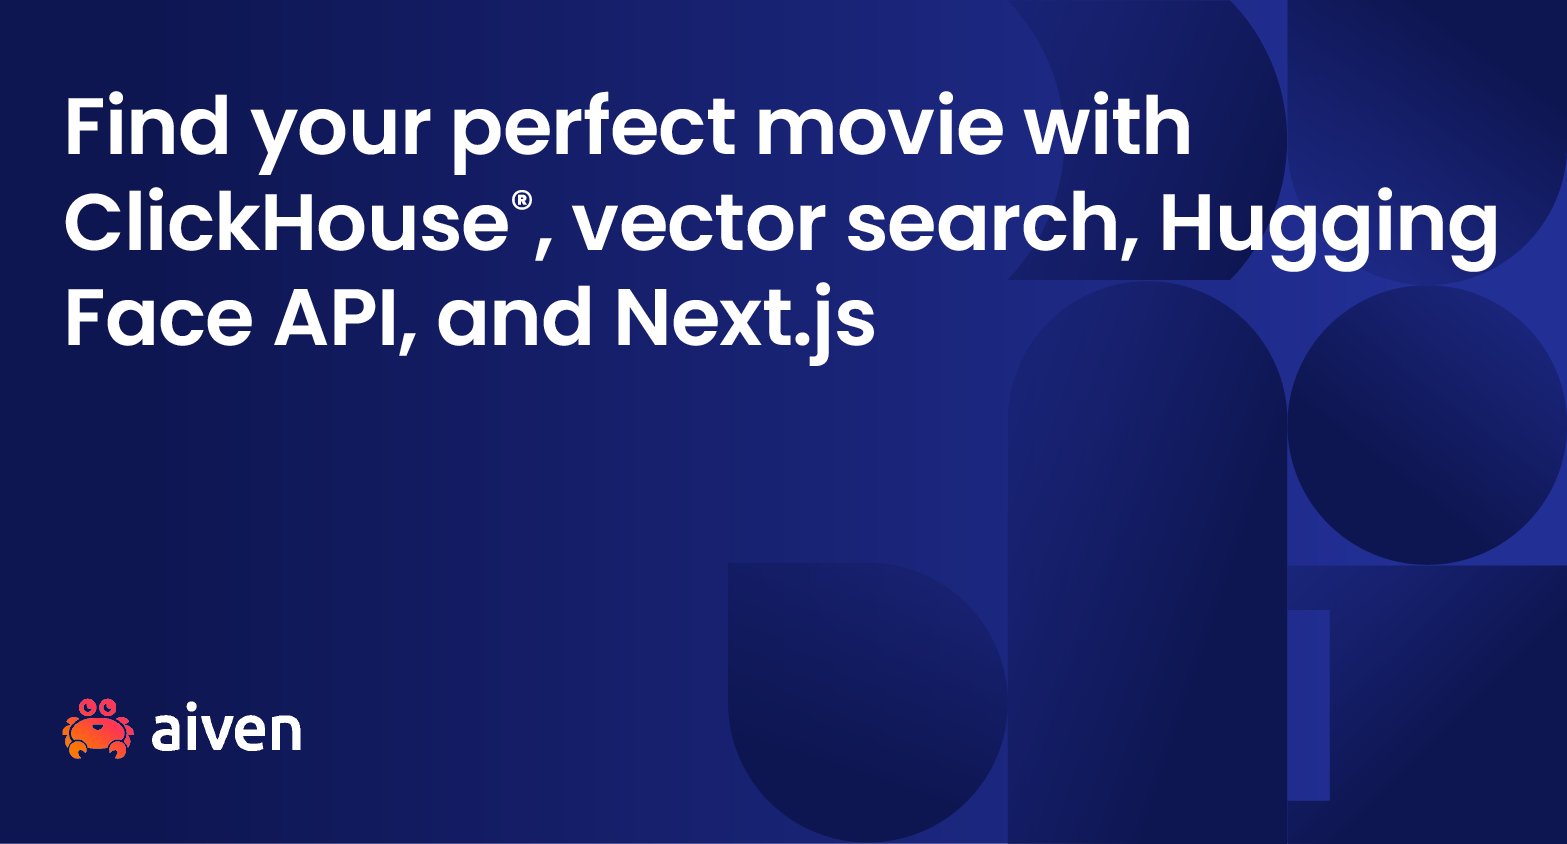 Find your perfect movie with ClickHouse®, vector search, Hugging Face API, and Next.js illustration